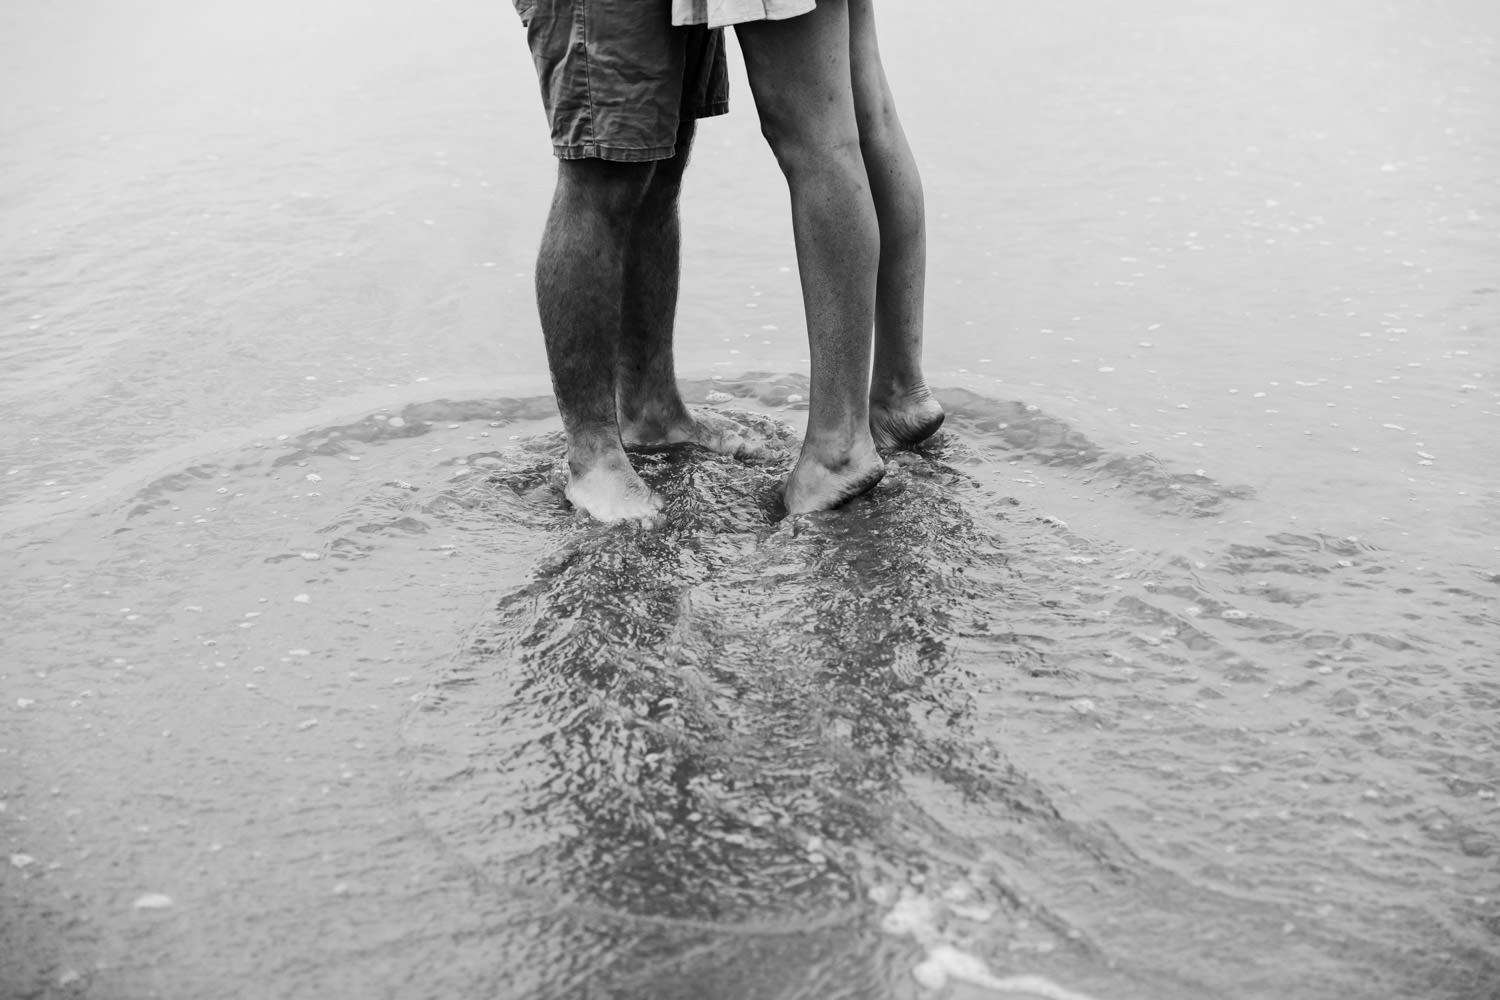 engagement at the beach- Honest, natural, fun, romantic family-wedding-photography in brisbane queensland